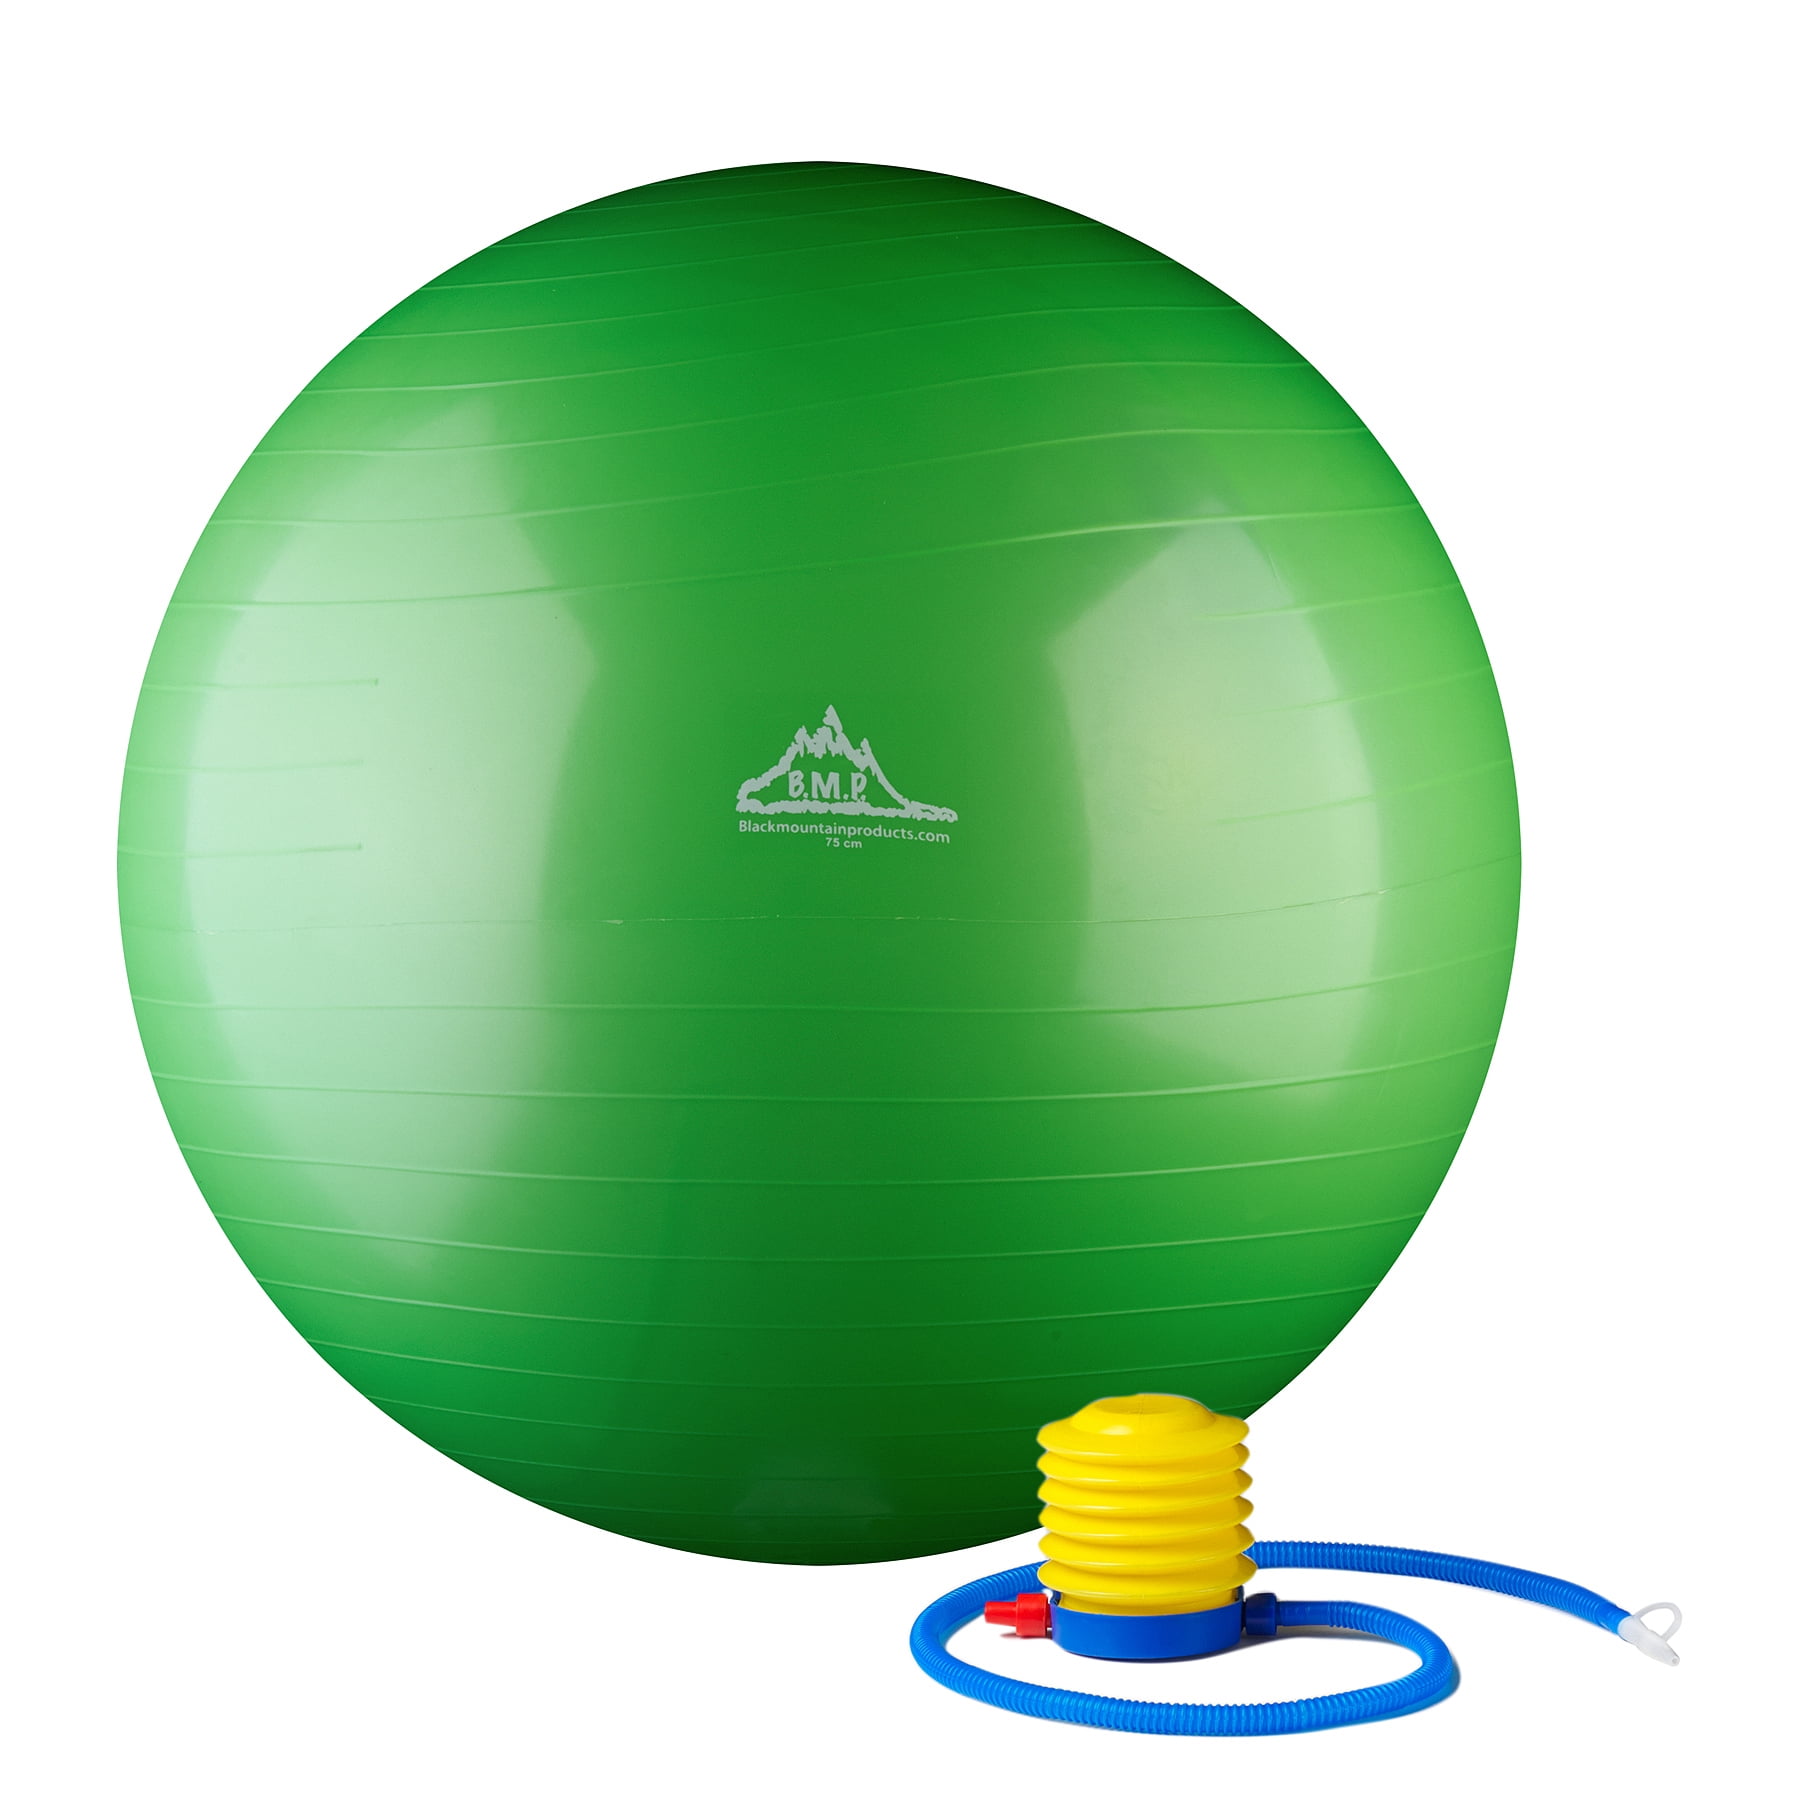 BLACK MOUNTAIN PRODUCTS 65cm Green Gym Ball 65 cm Static Strength Exercise Stability Ball with Pump, Green